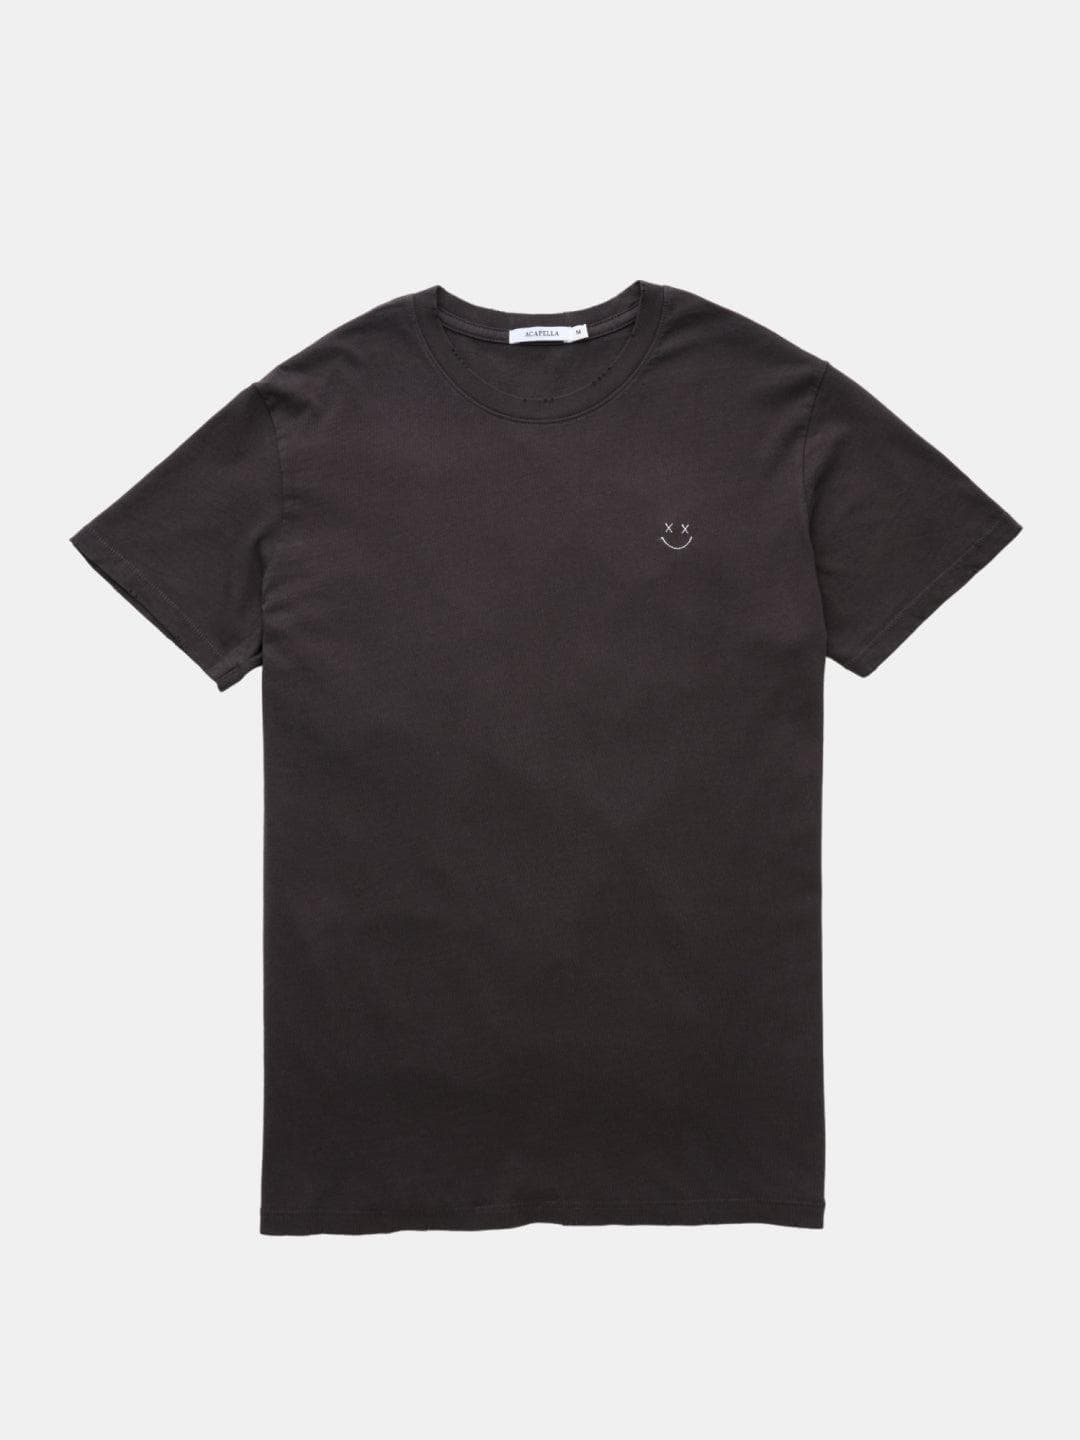 Smiley tee - Washed Black